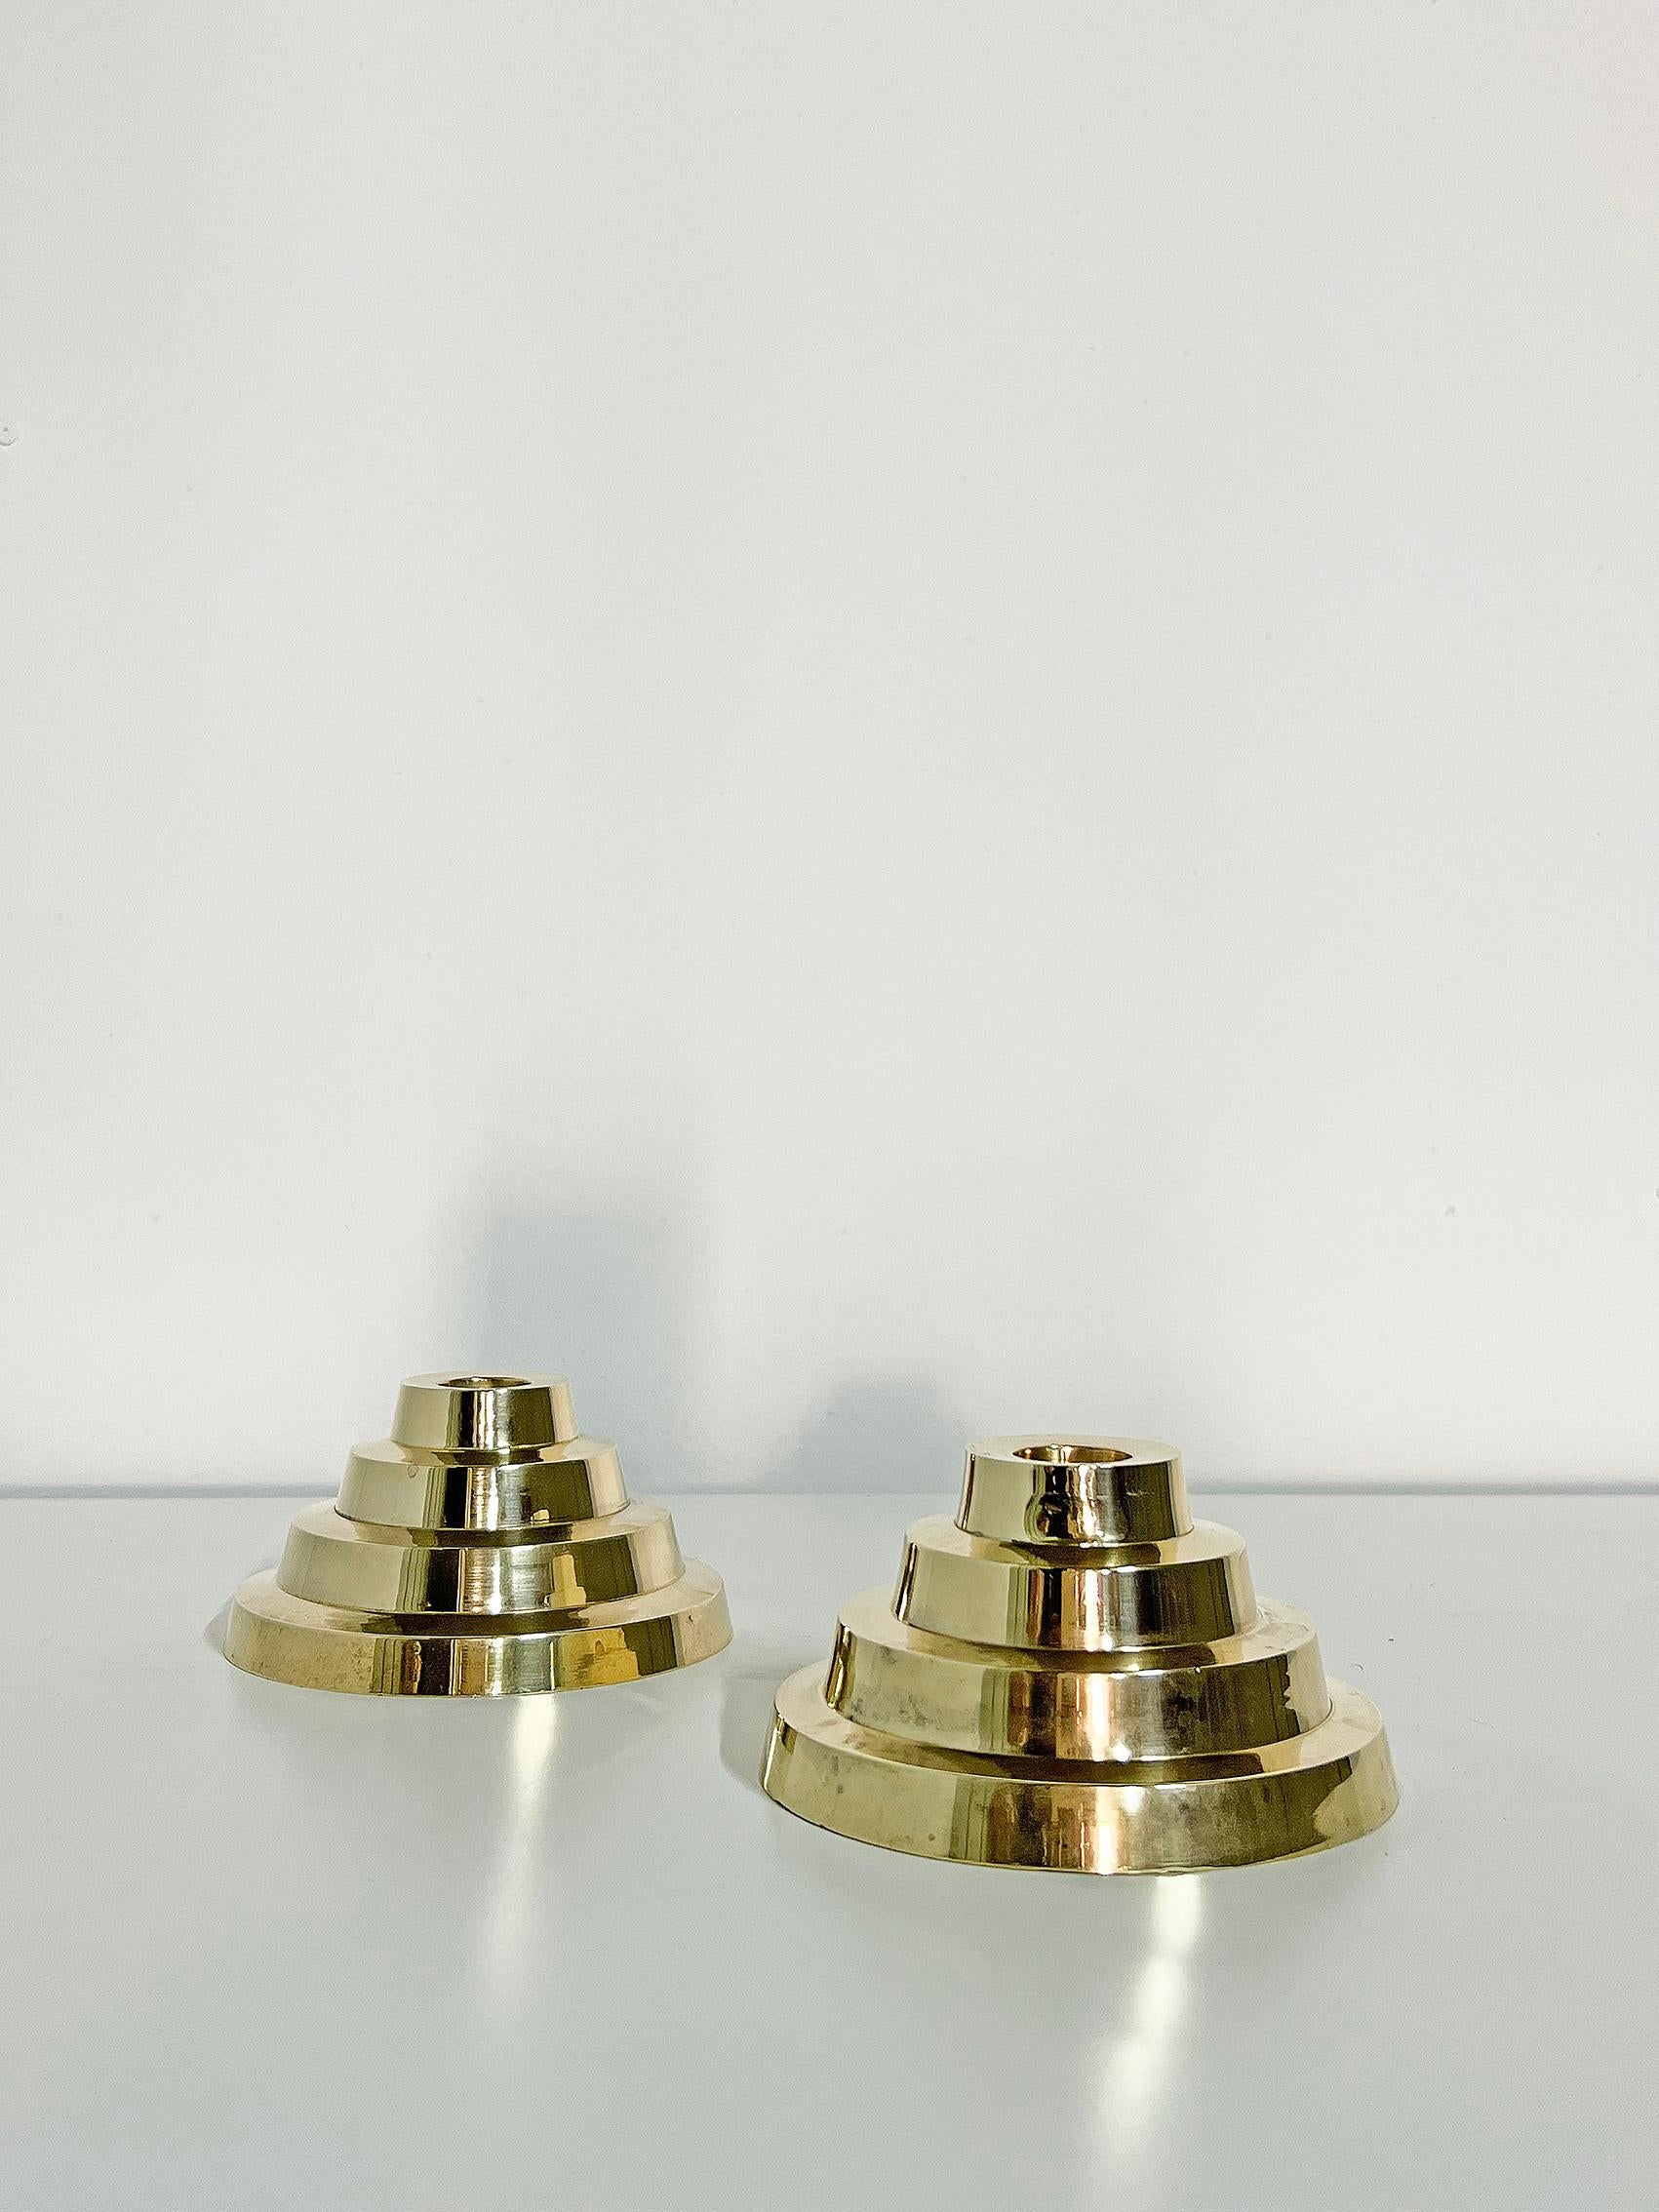 European Cool Candle Holders in Brass, Set of Two For Sale